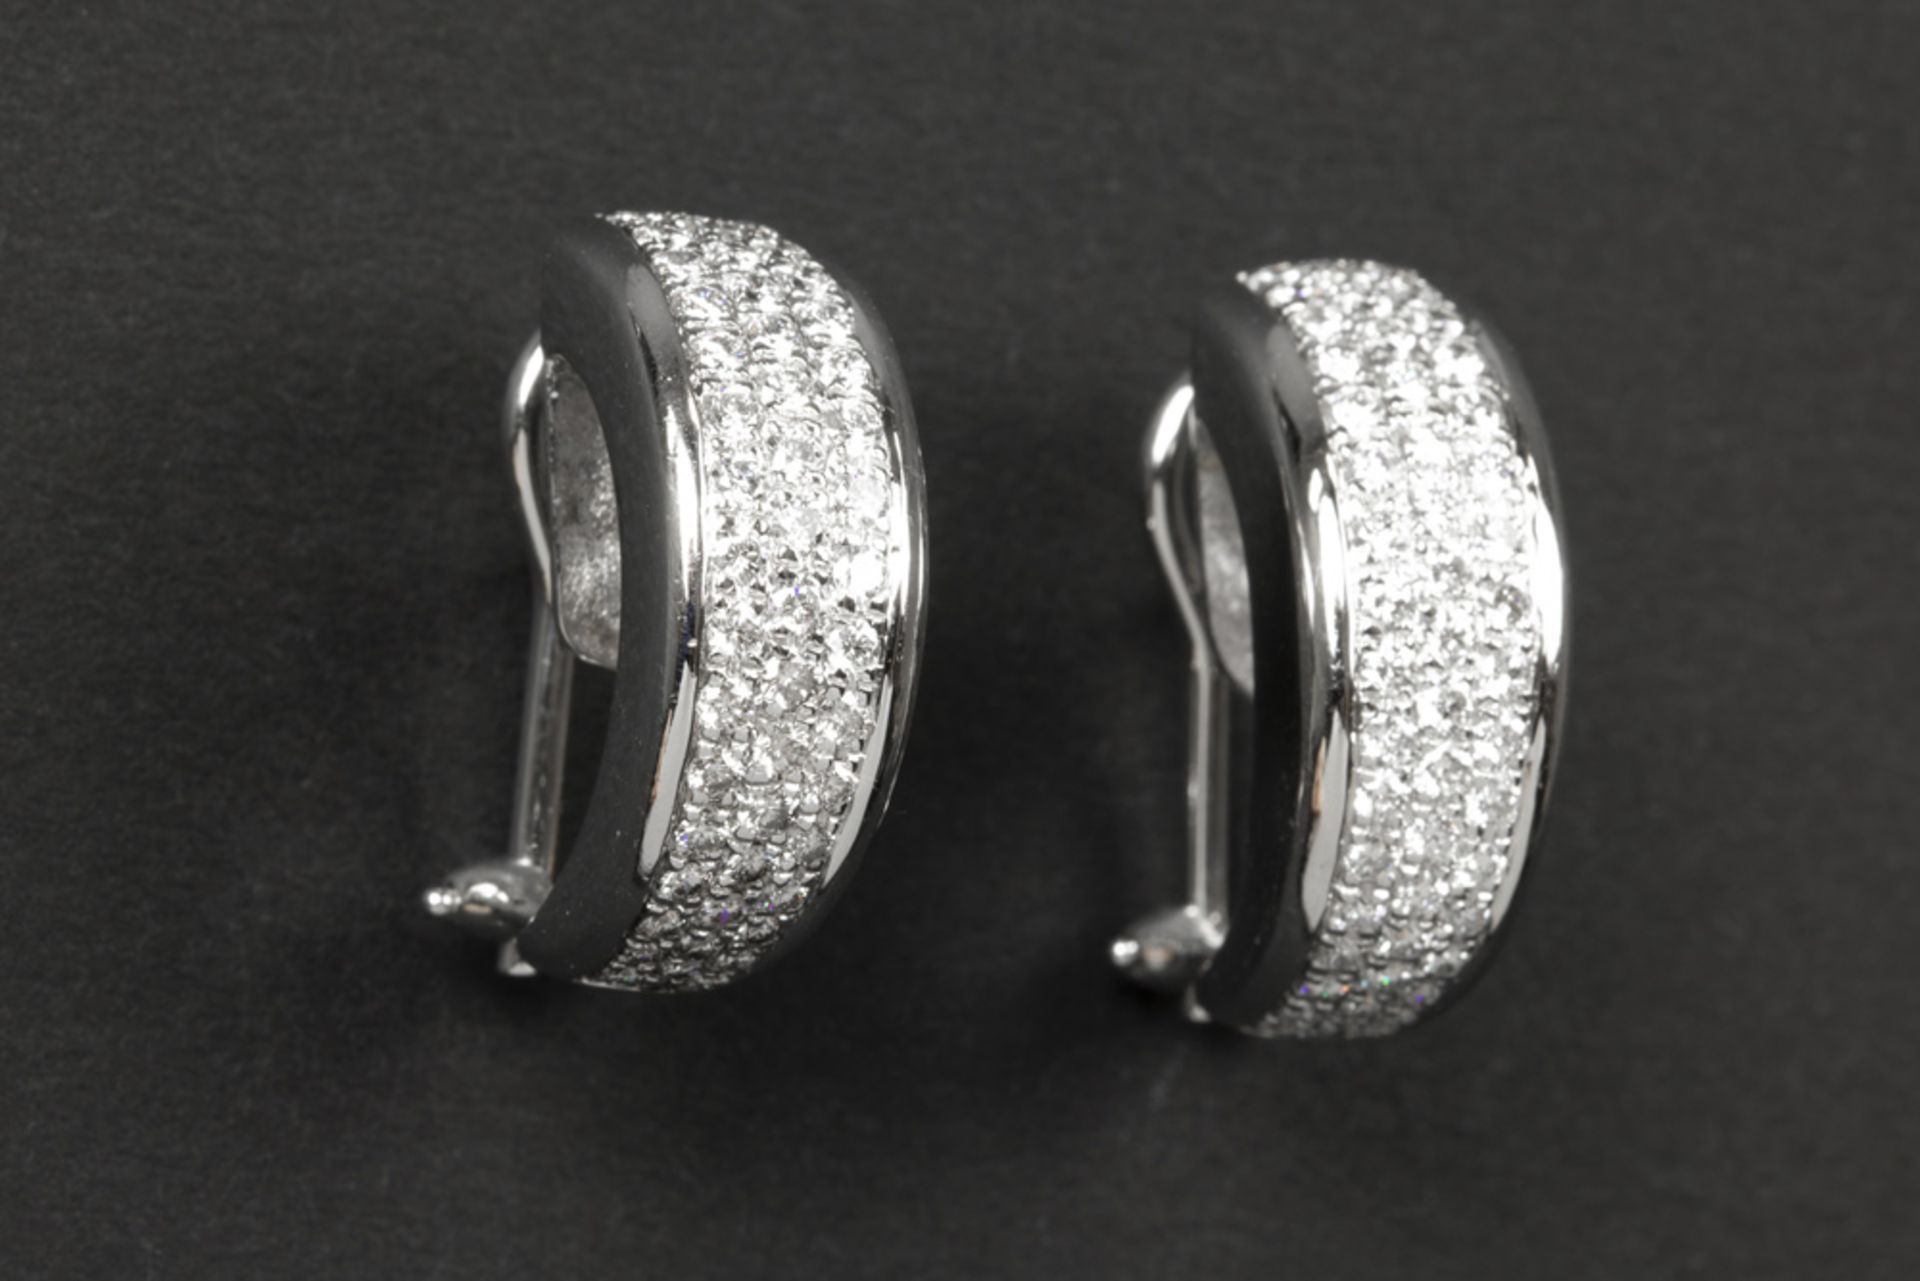 pair of earrings in white gold (18 carat) with ca 2 carat of high quality brilliant cut